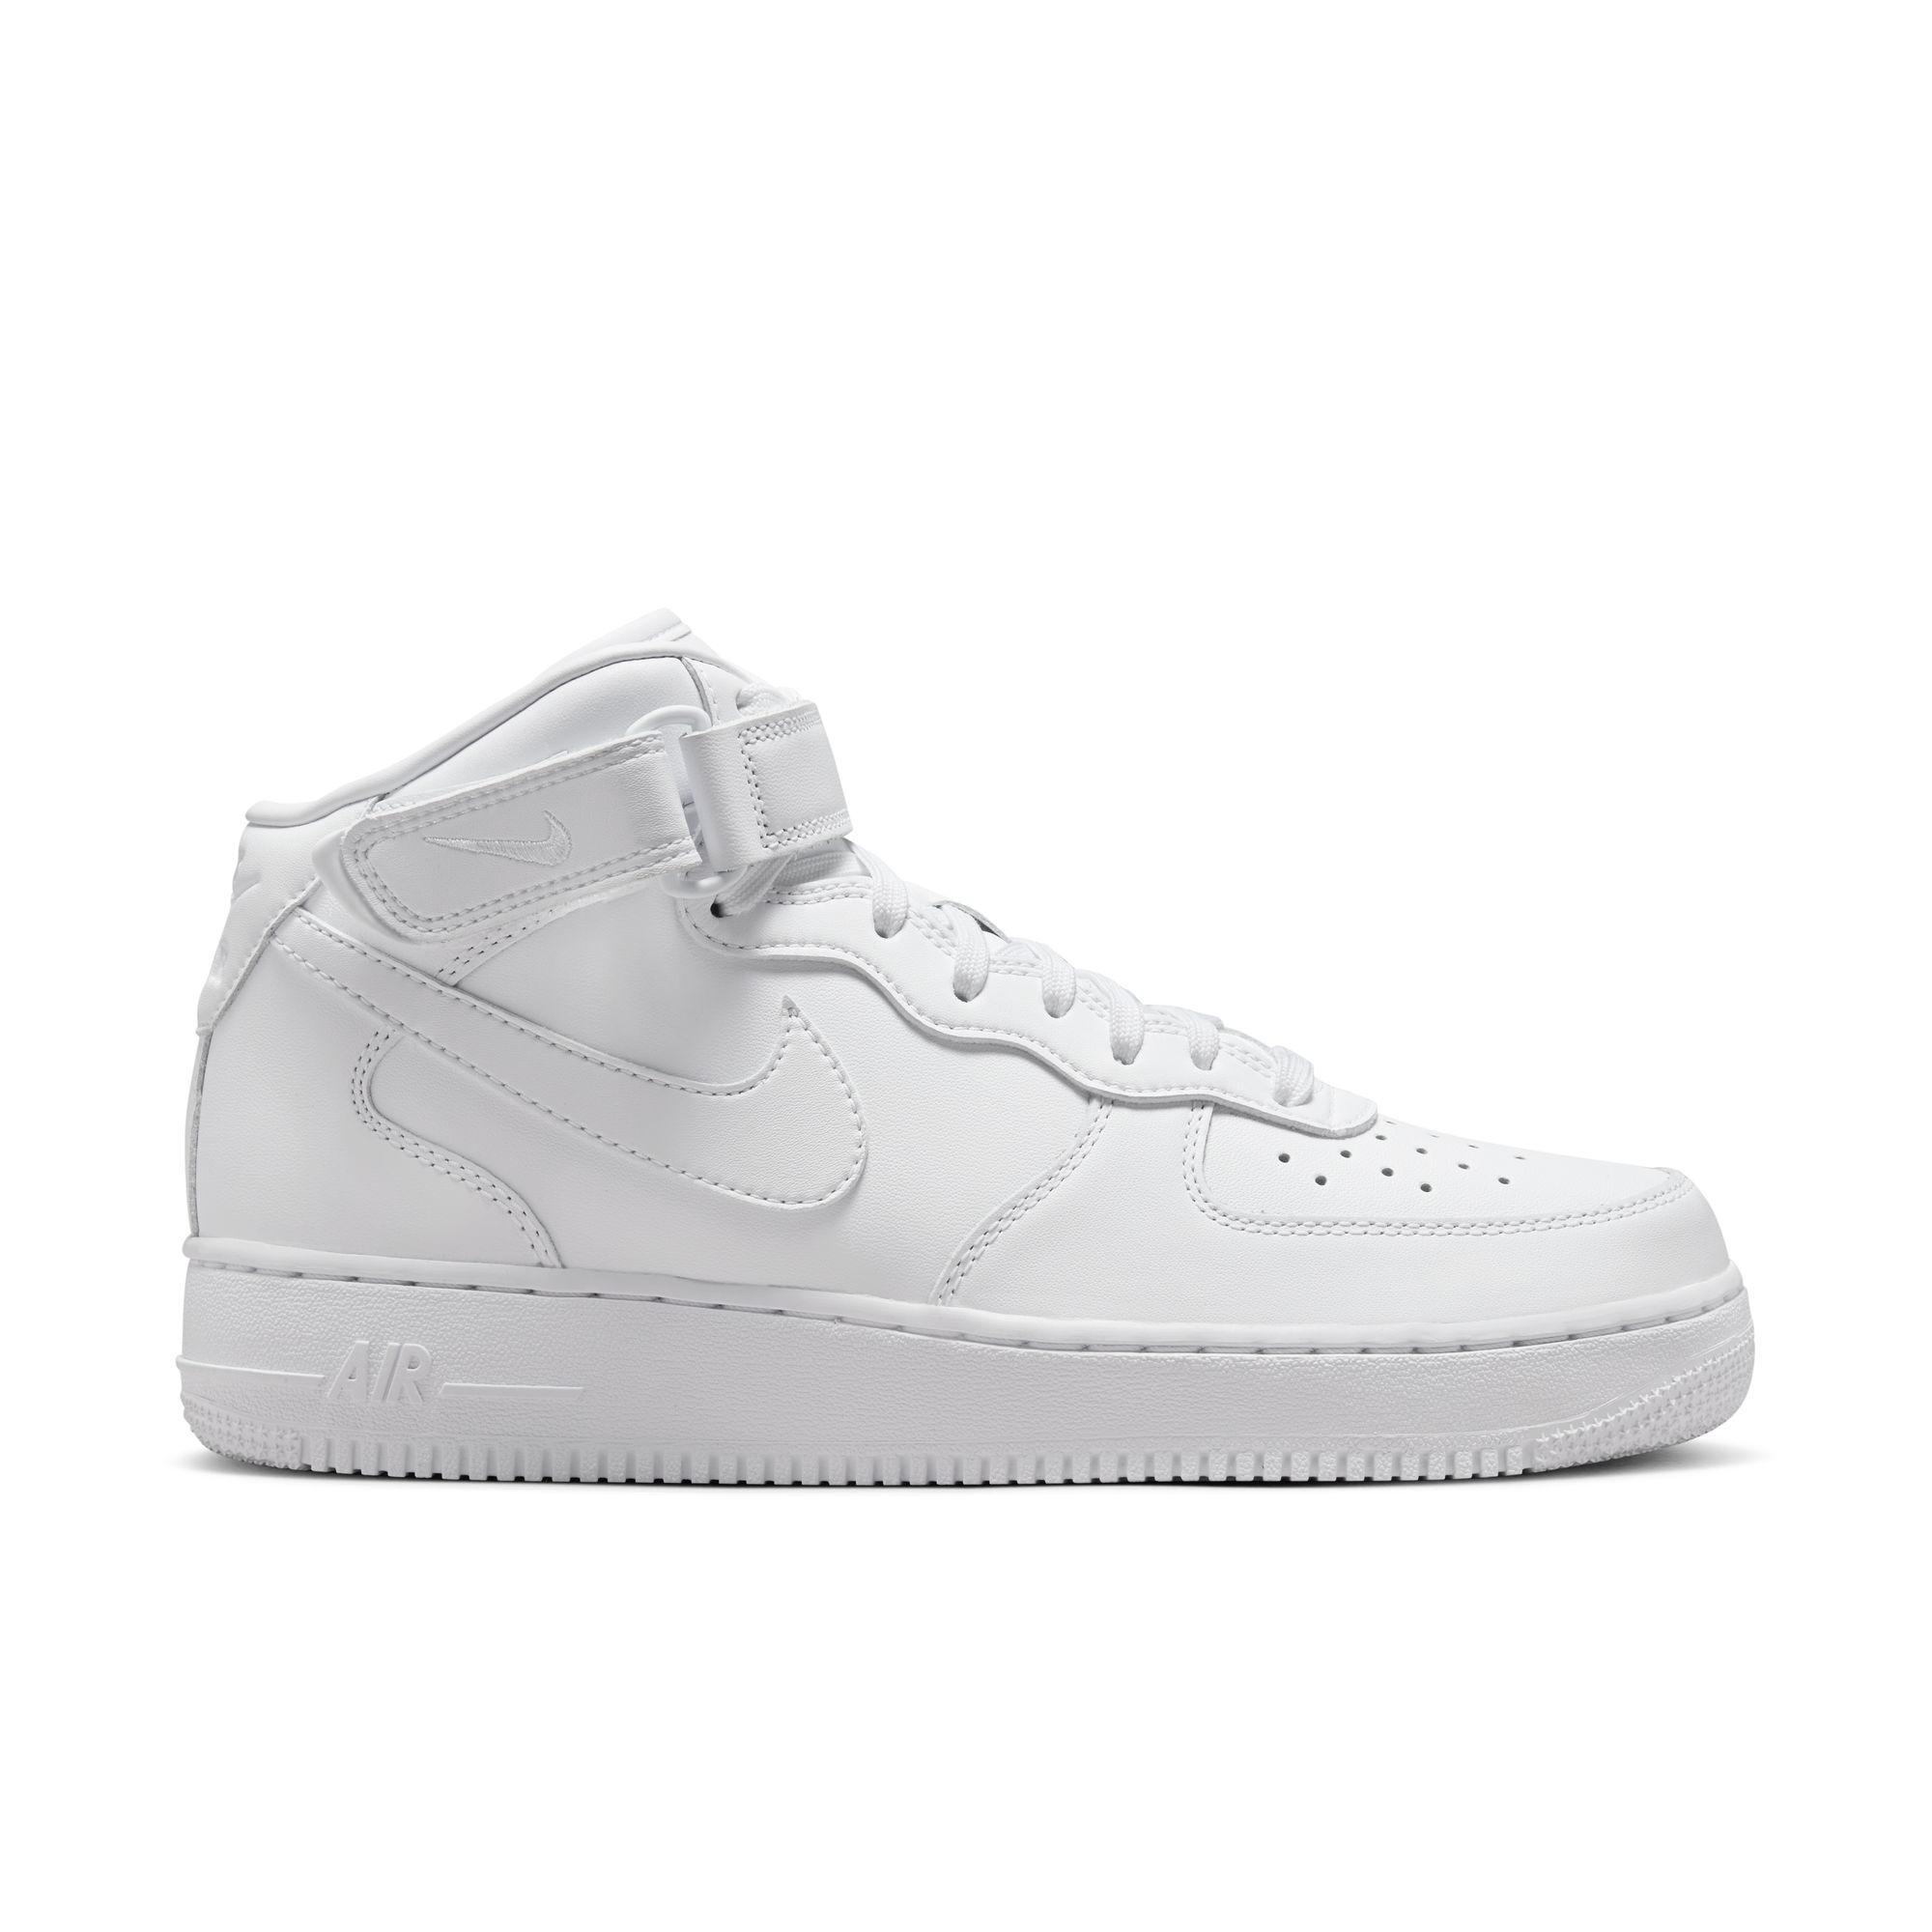 NIKE AIR FORCE 1 MID MEN'S SHOES